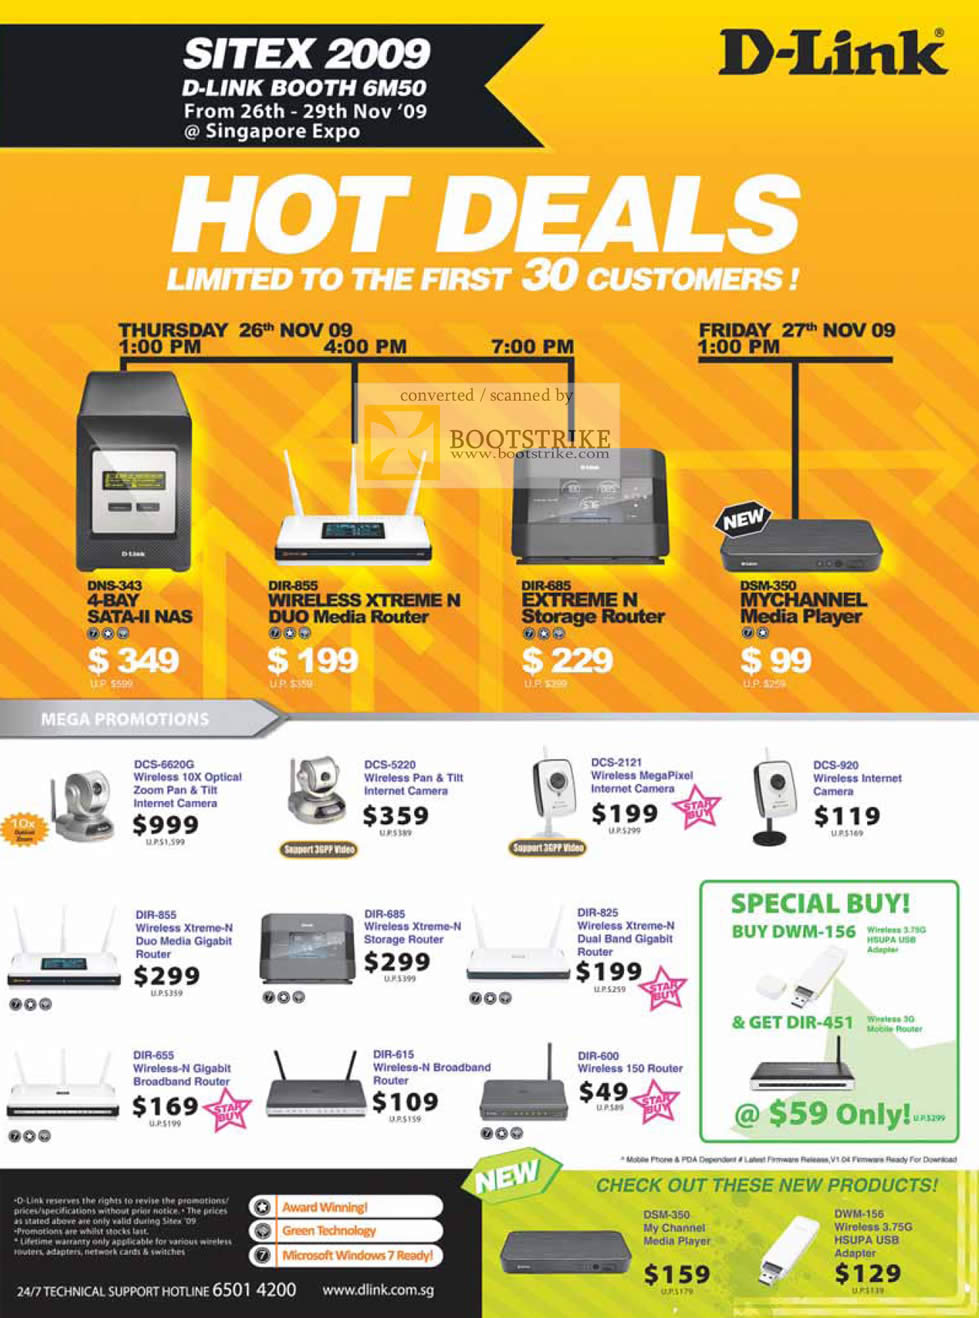 Sitex 2009 price list image brochure of D-Link NAS Wireless N Media Router Storage Player Internet Camera IPCam Adapter